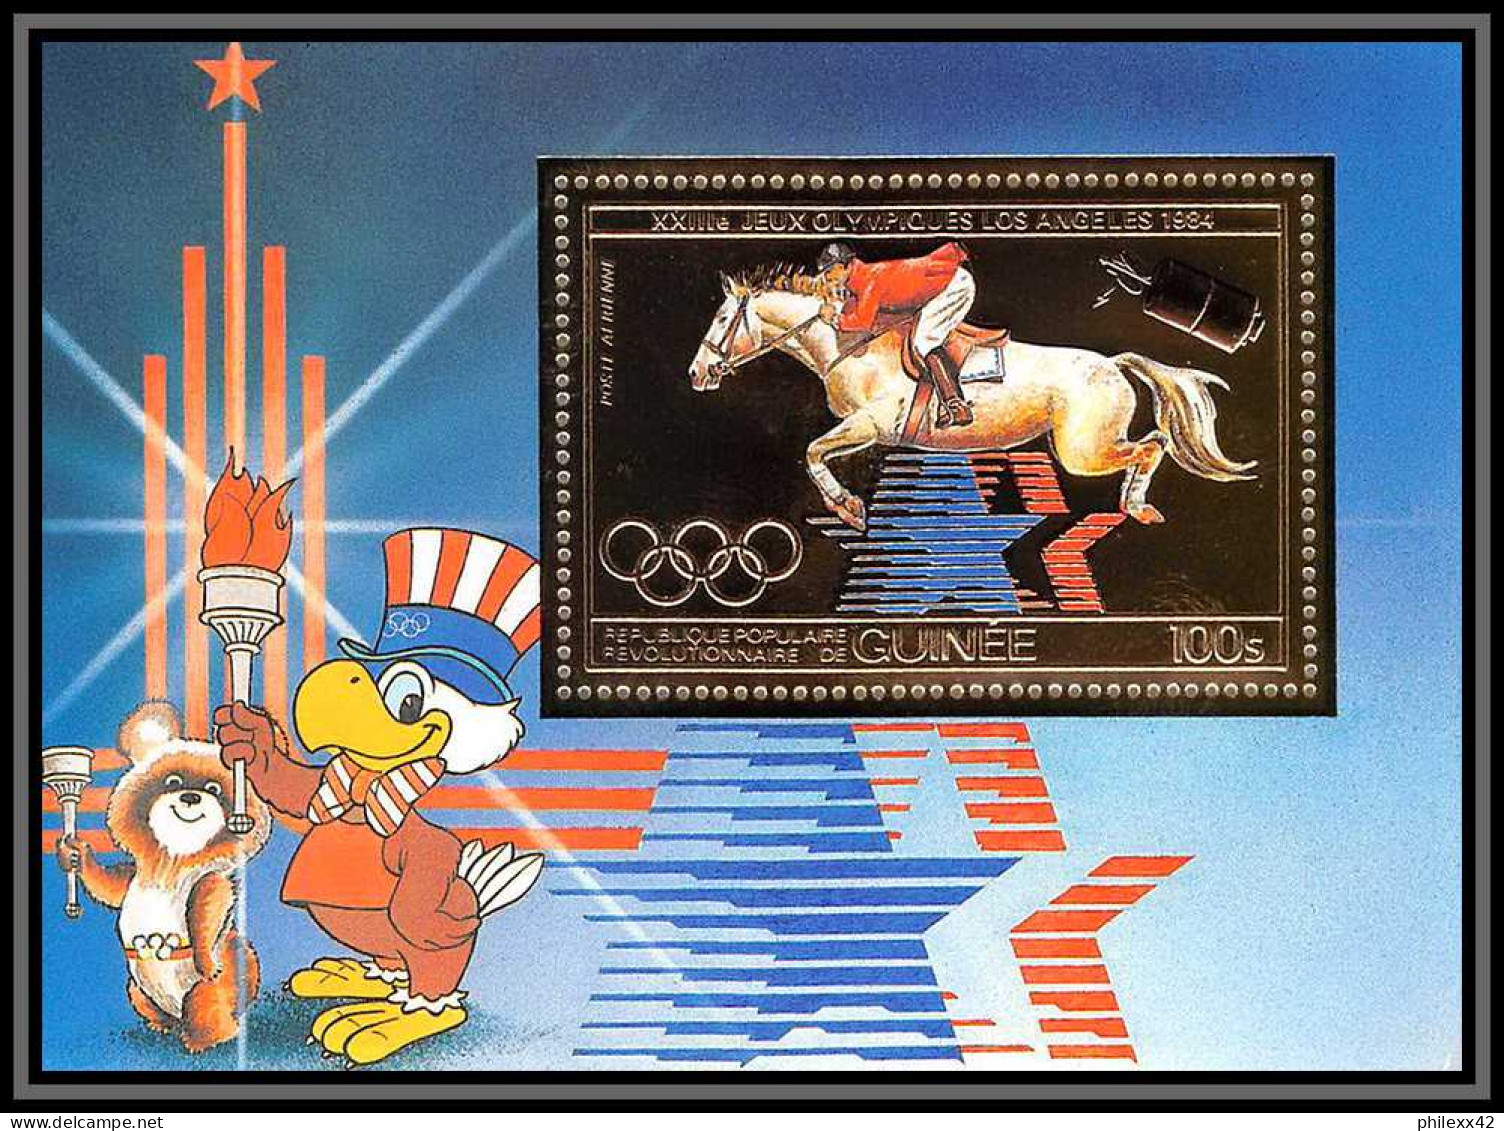 85849/ N°59 A Jumping LOS ANGELES 1984 Jeux Olympiques Olympic Games Guinée Guinea OR Gold Stamps ** MNH Cheval Horse - Ete 1984: Los Angeles